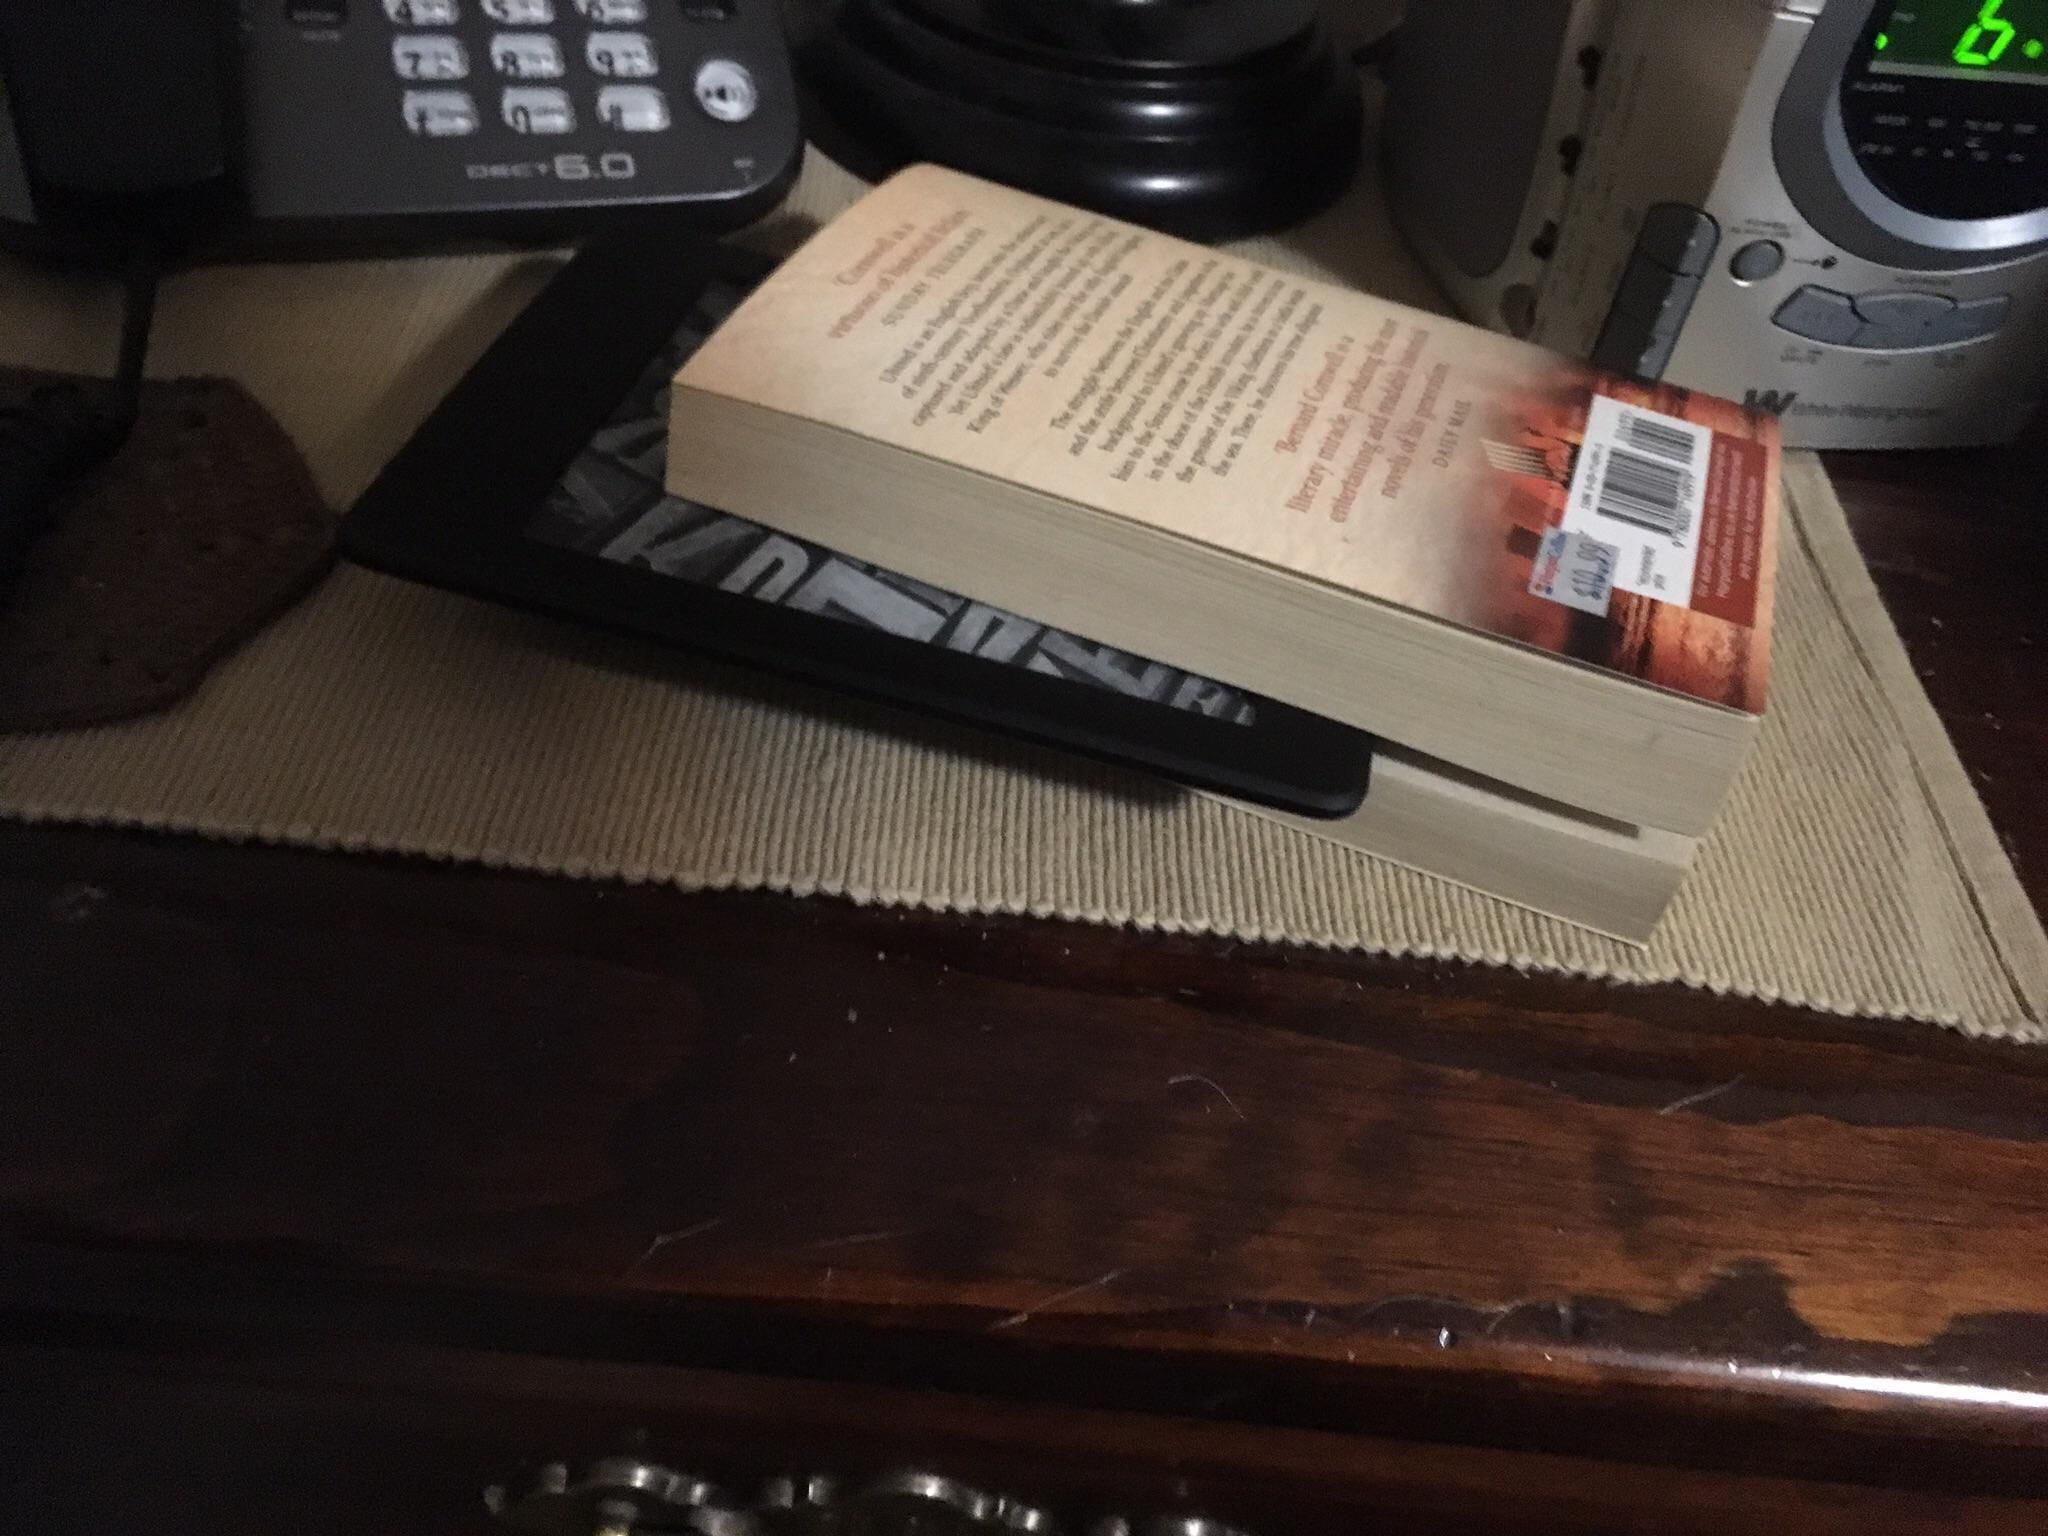 My dad likes reading so I got him a Kindle for is birthday. He's using it as a bookmark.